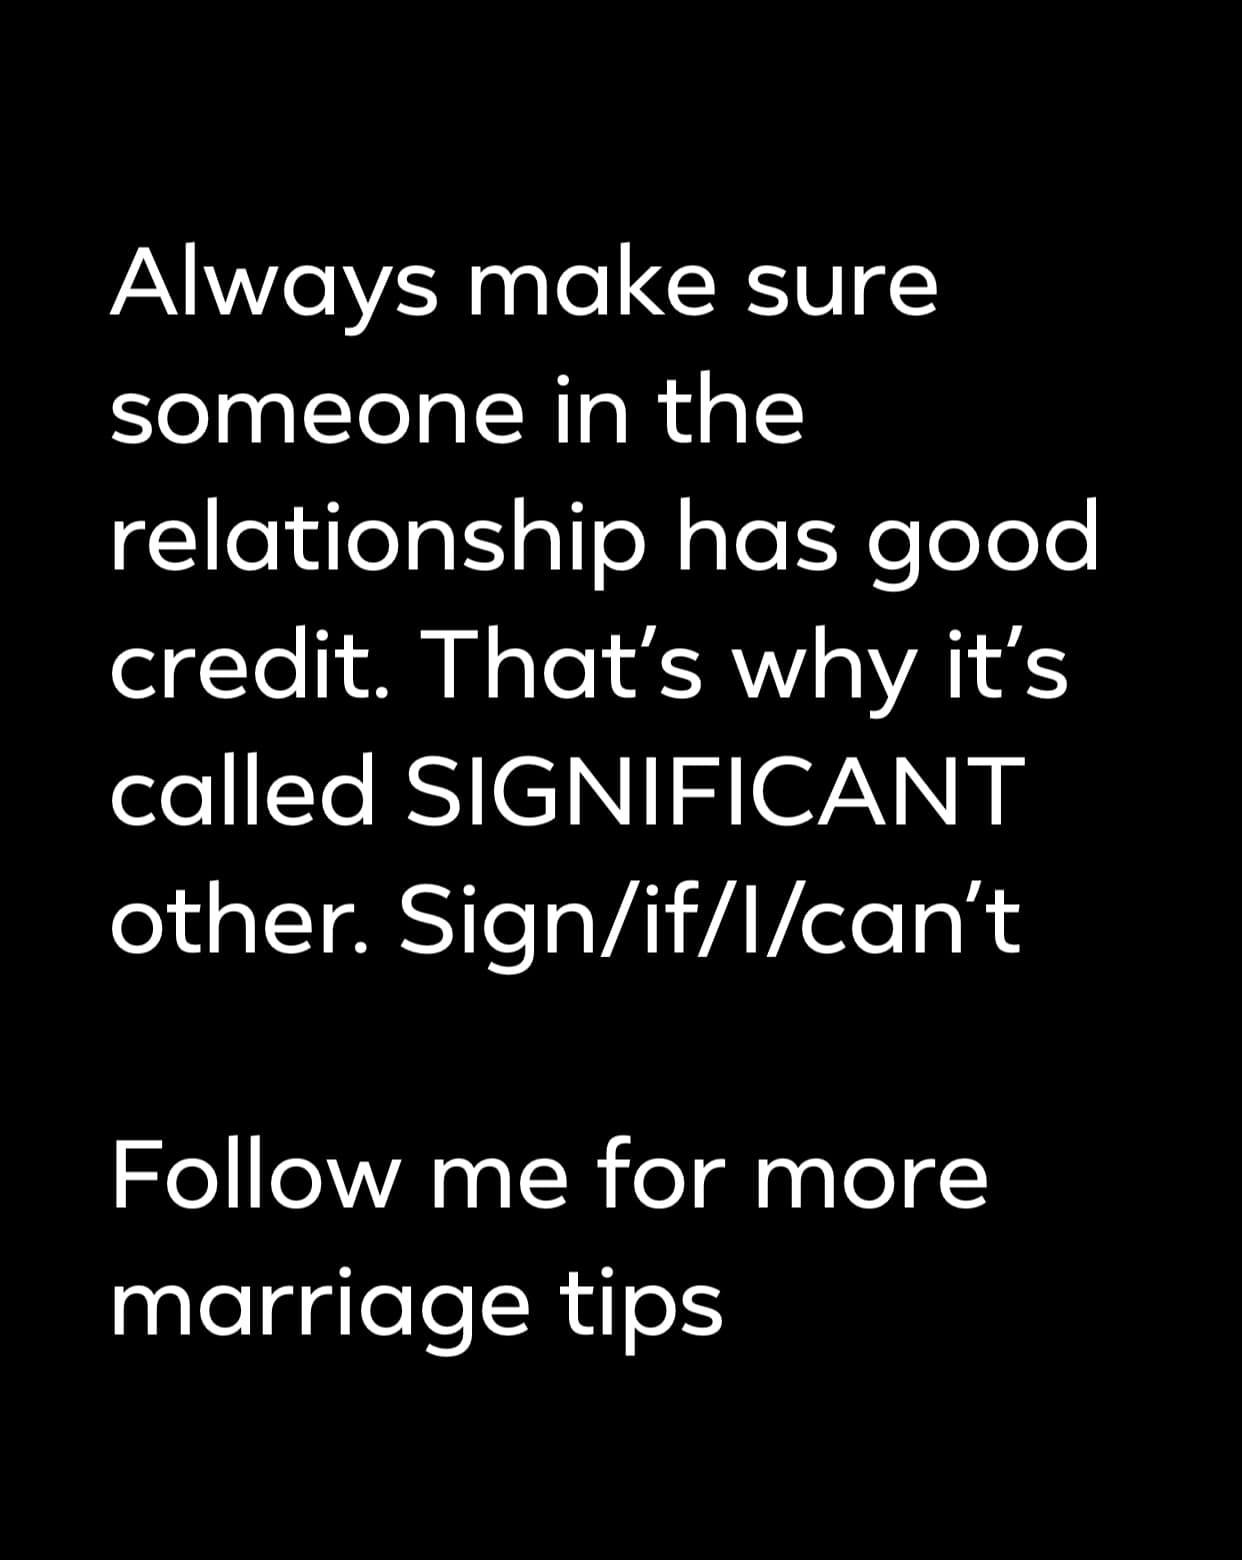 Expectations vs Reality memes - Marriage - Always make sure someone in the relationship has good credit. That's why it's called Significant other. Signiflcan't me for more marriage tips